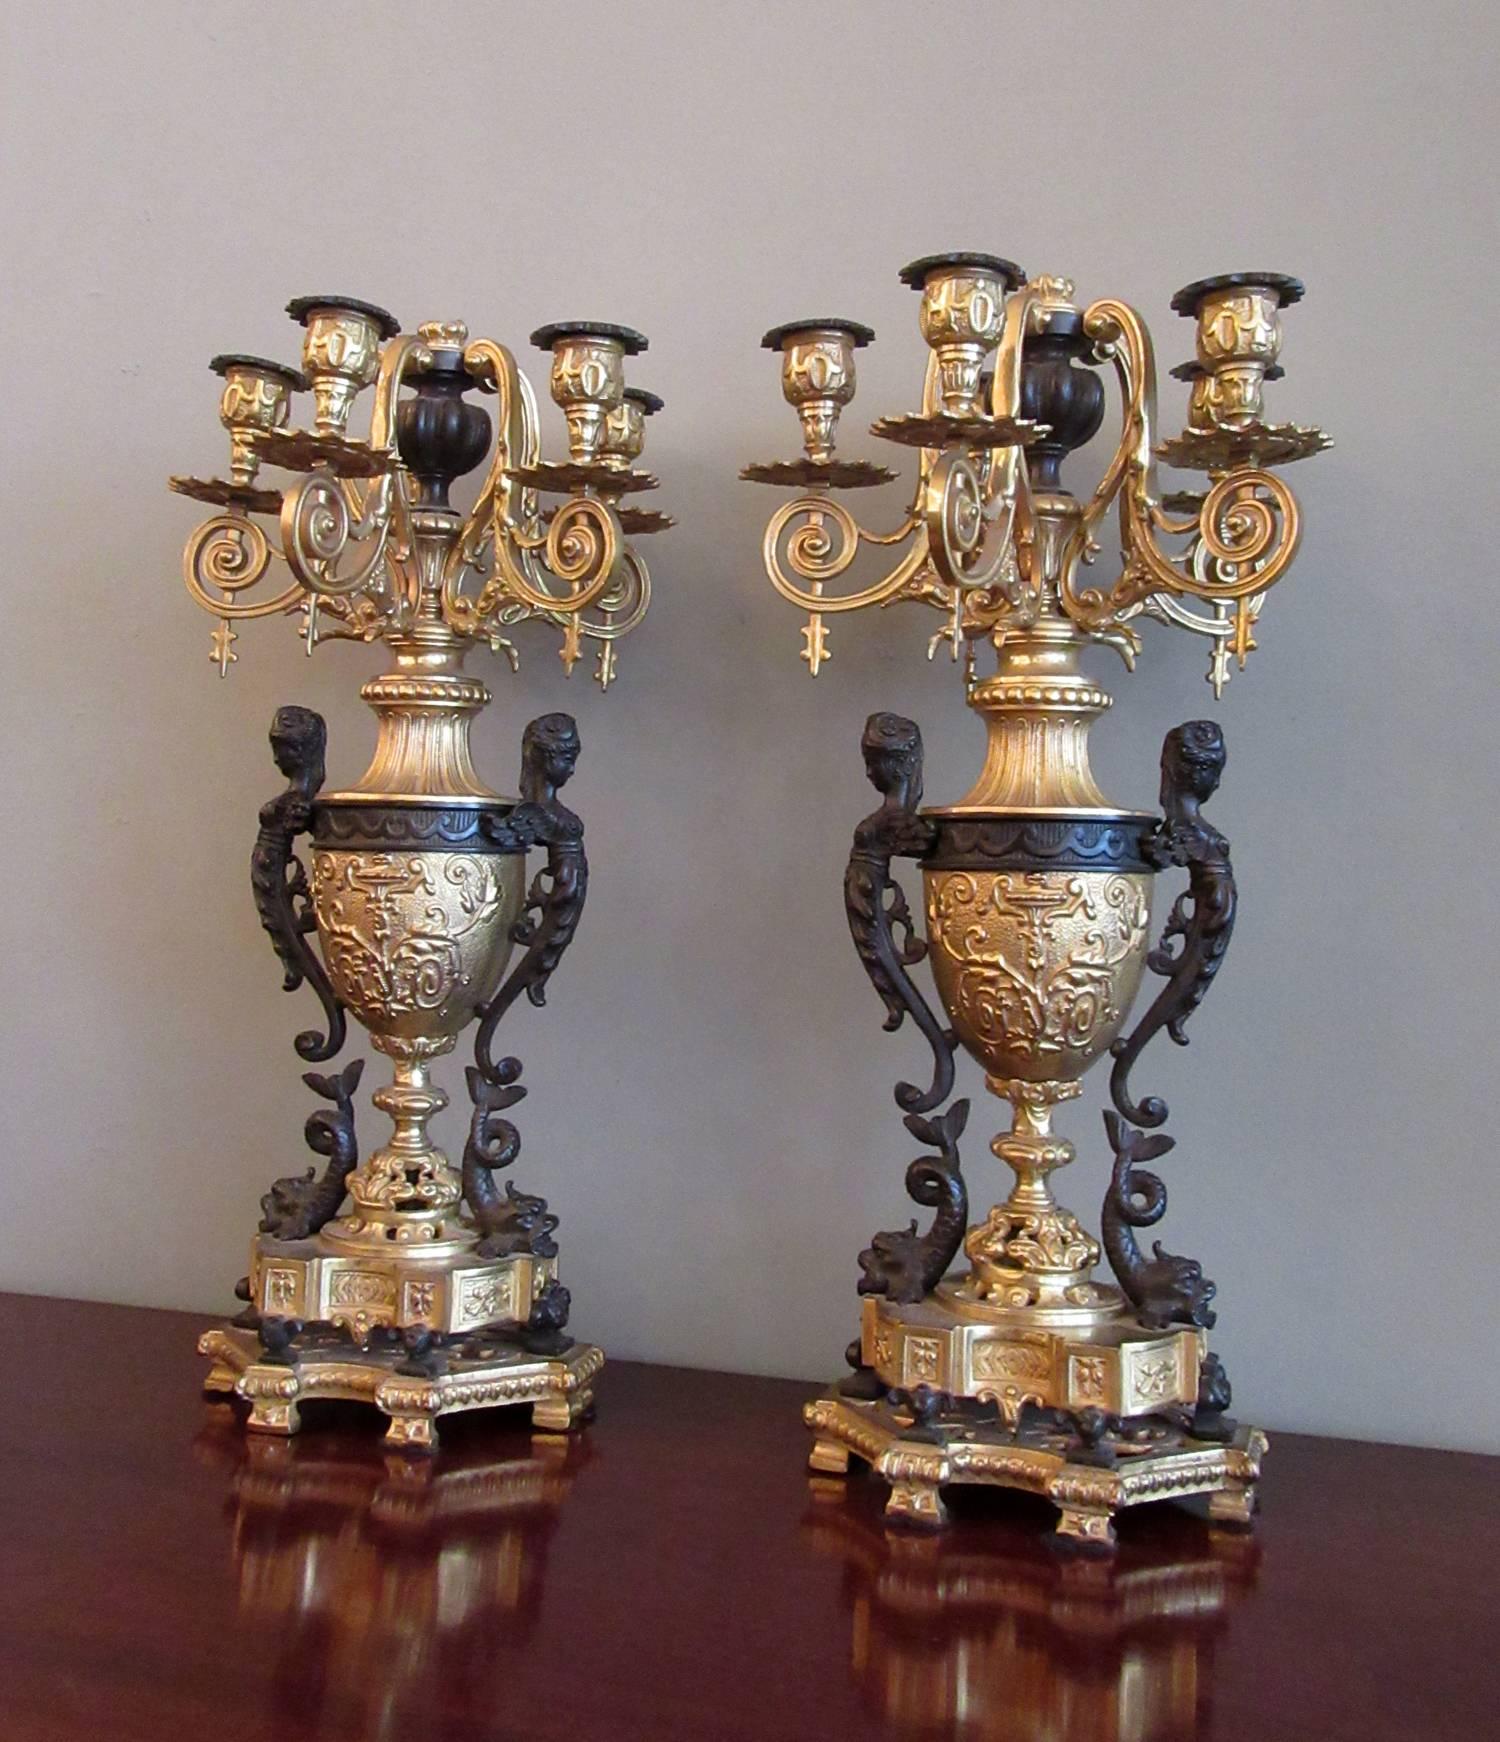 Pair of 19th Century French Neoclassical Patinated & Bronze Doré Urn Candelabras 1